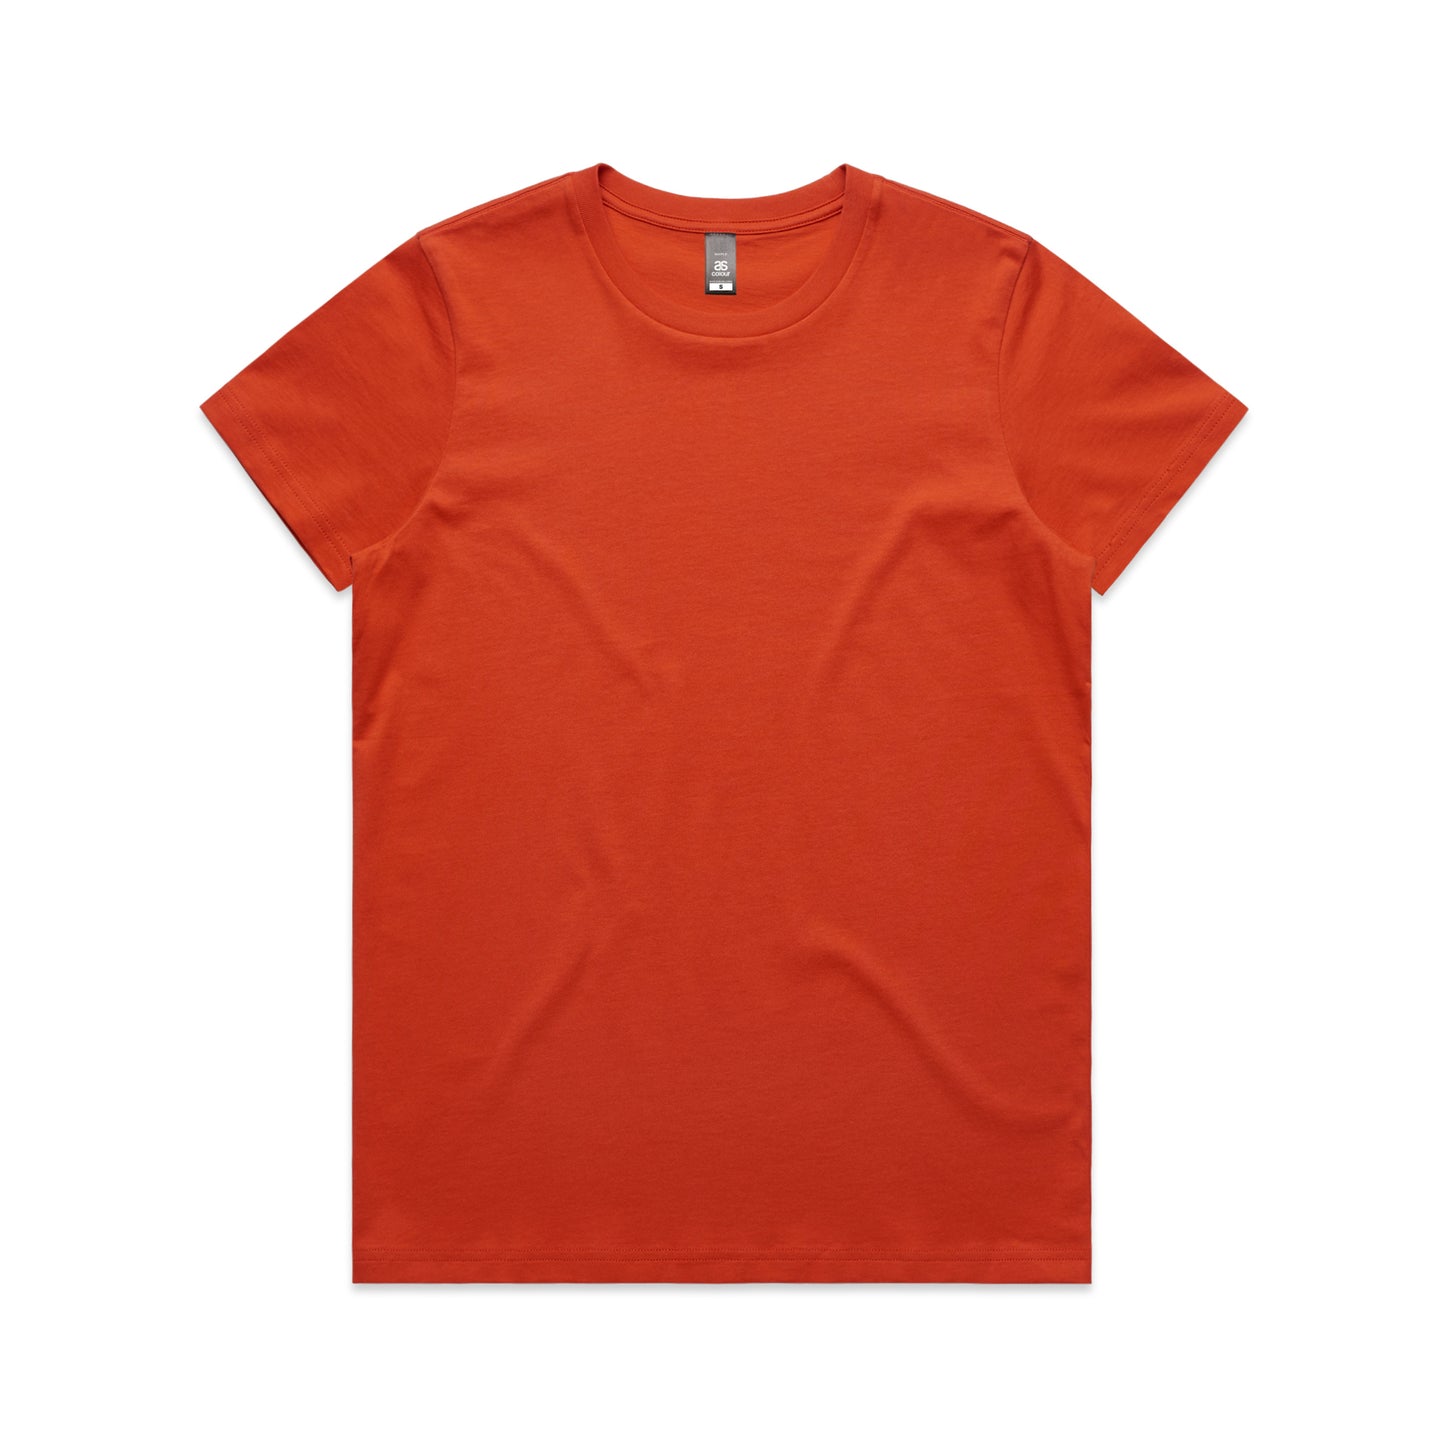 Ascolour Maple Tee-(4001) 2nd Color